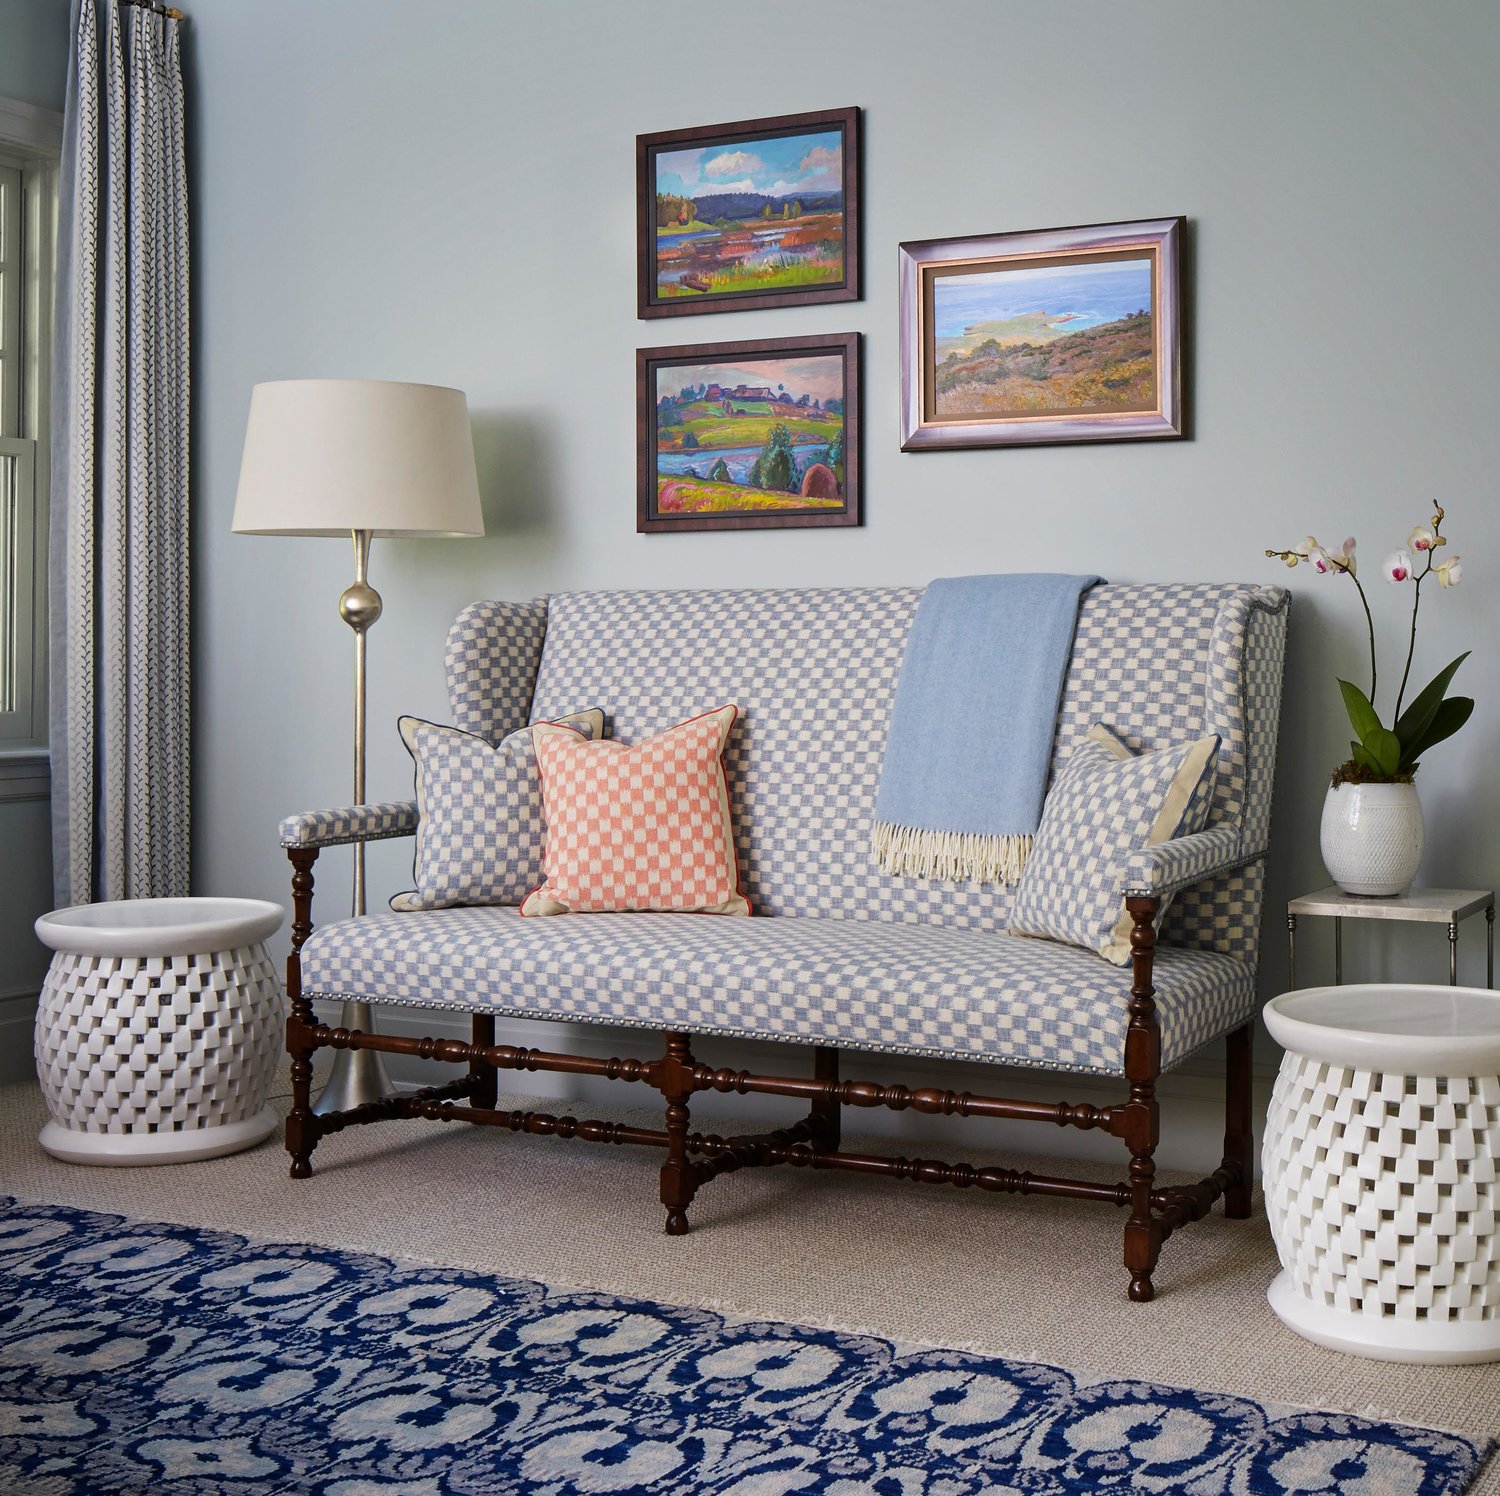 Charming check on a settee in a blue bedroom. Come see more interior design inspiration from Elizabeth Drake. Photo by Werner Straube. #interiordesign #classicdesign #traditionaldecor #housetour #elizabethdrake